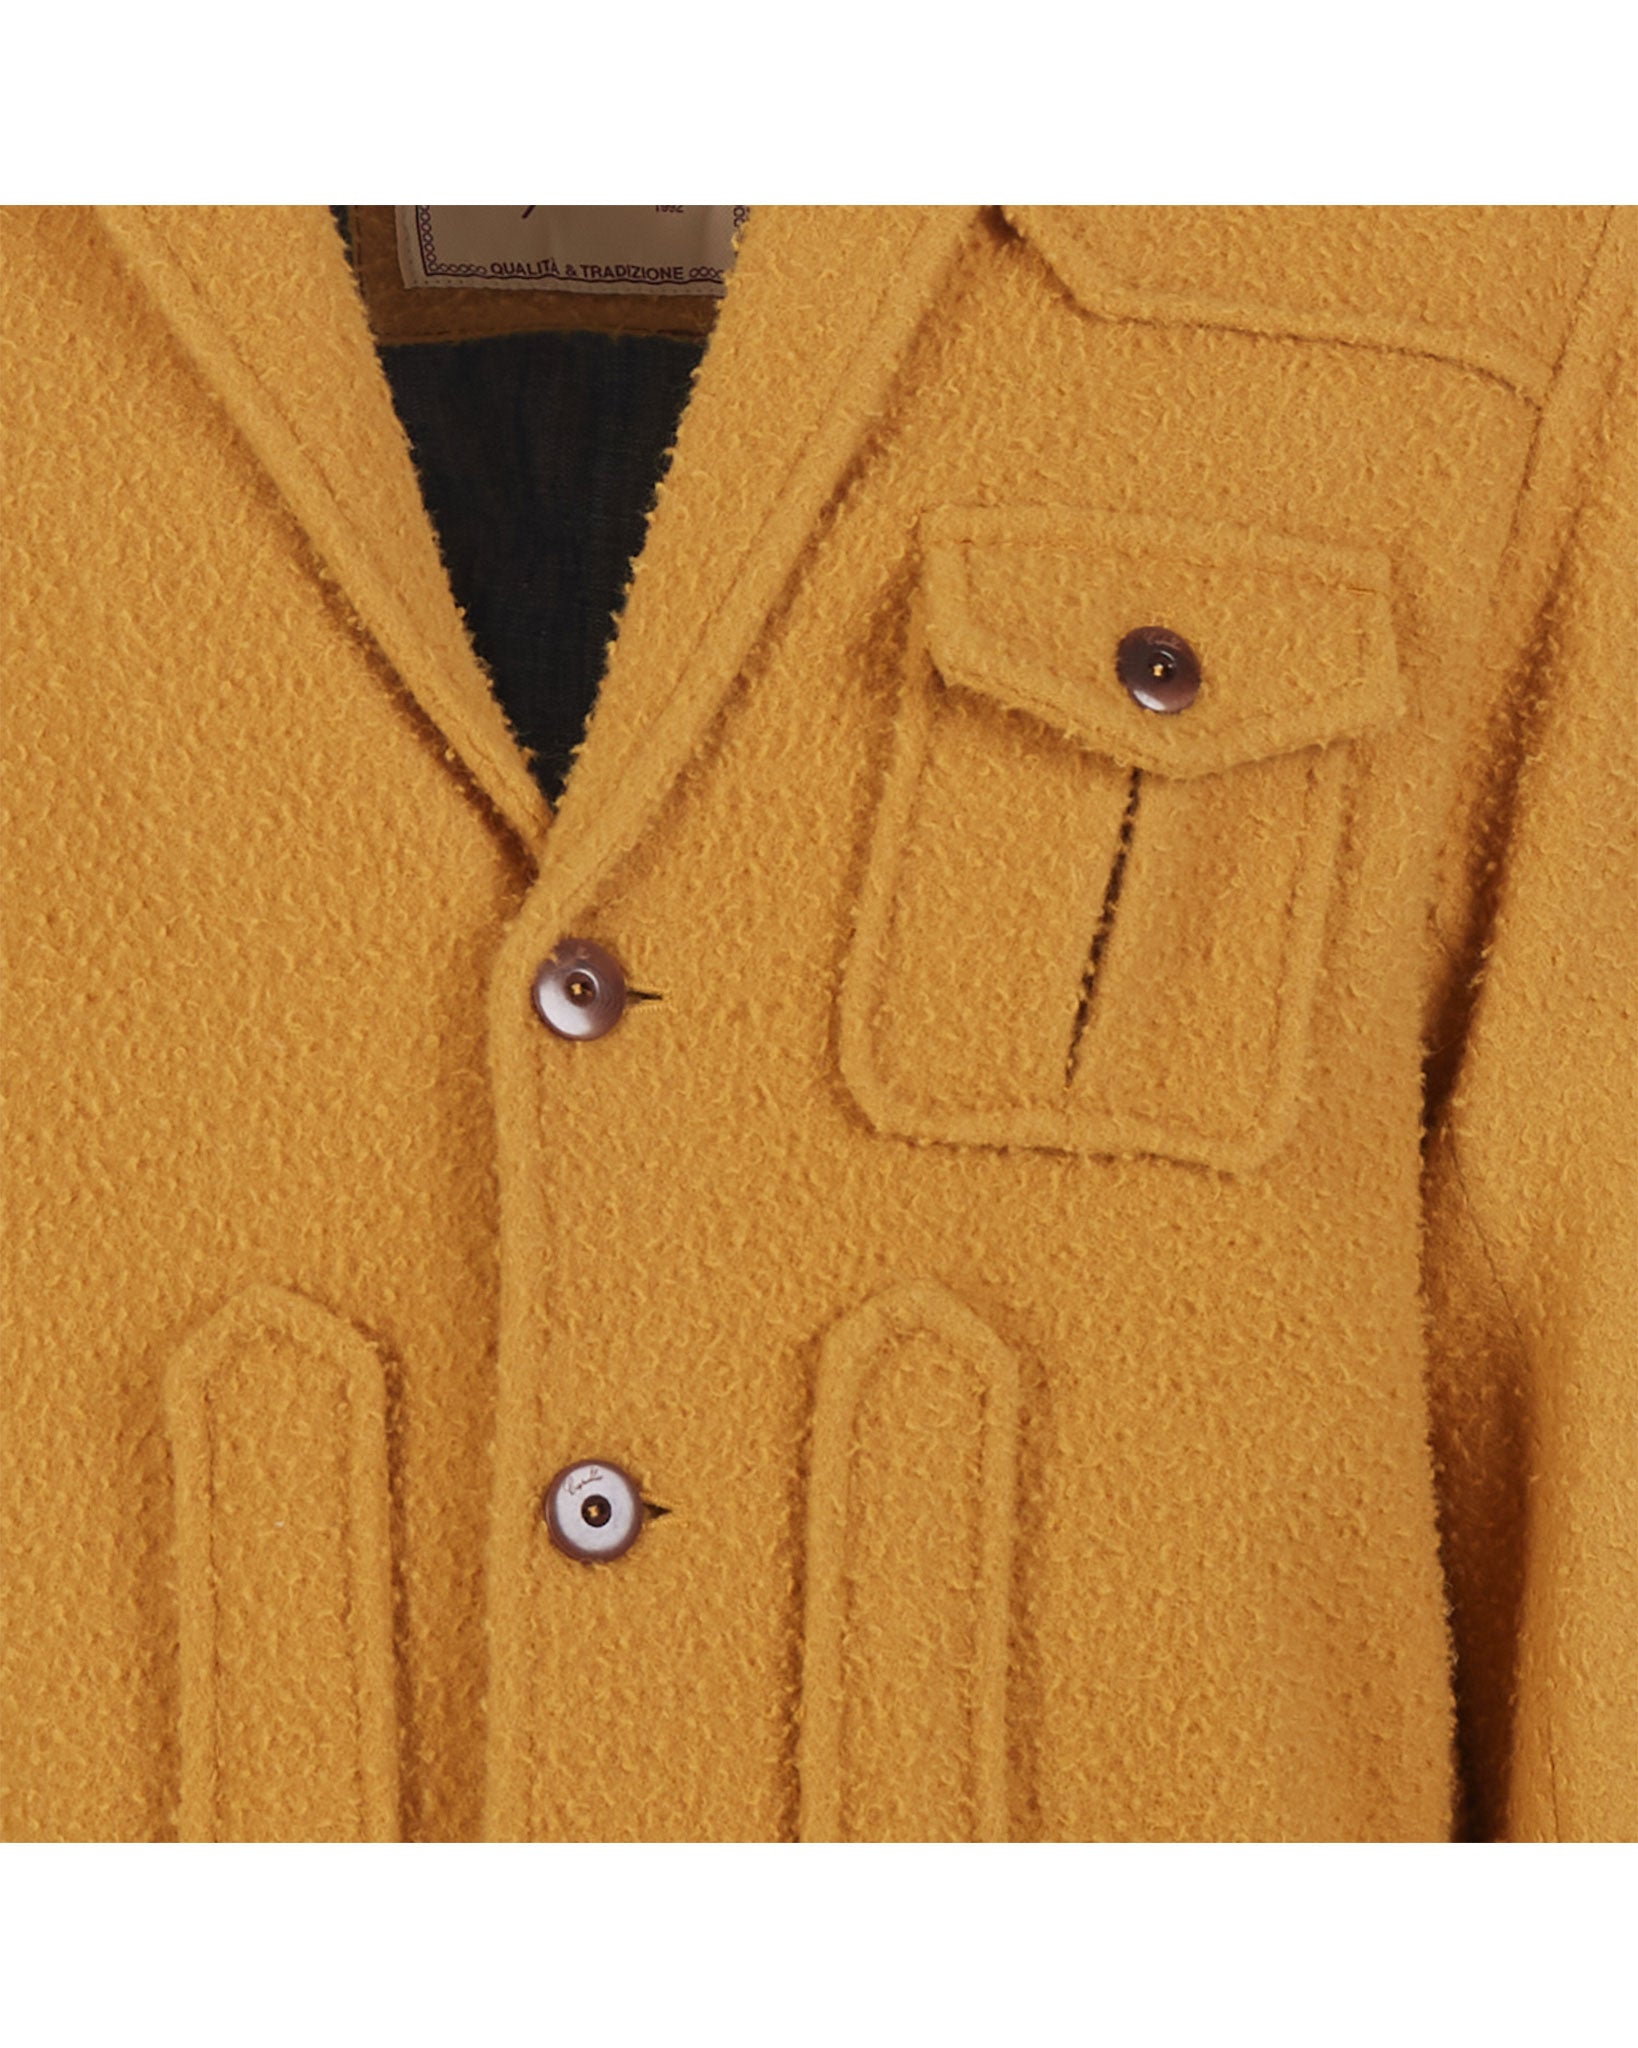 Iconic jacket in Casentino wool